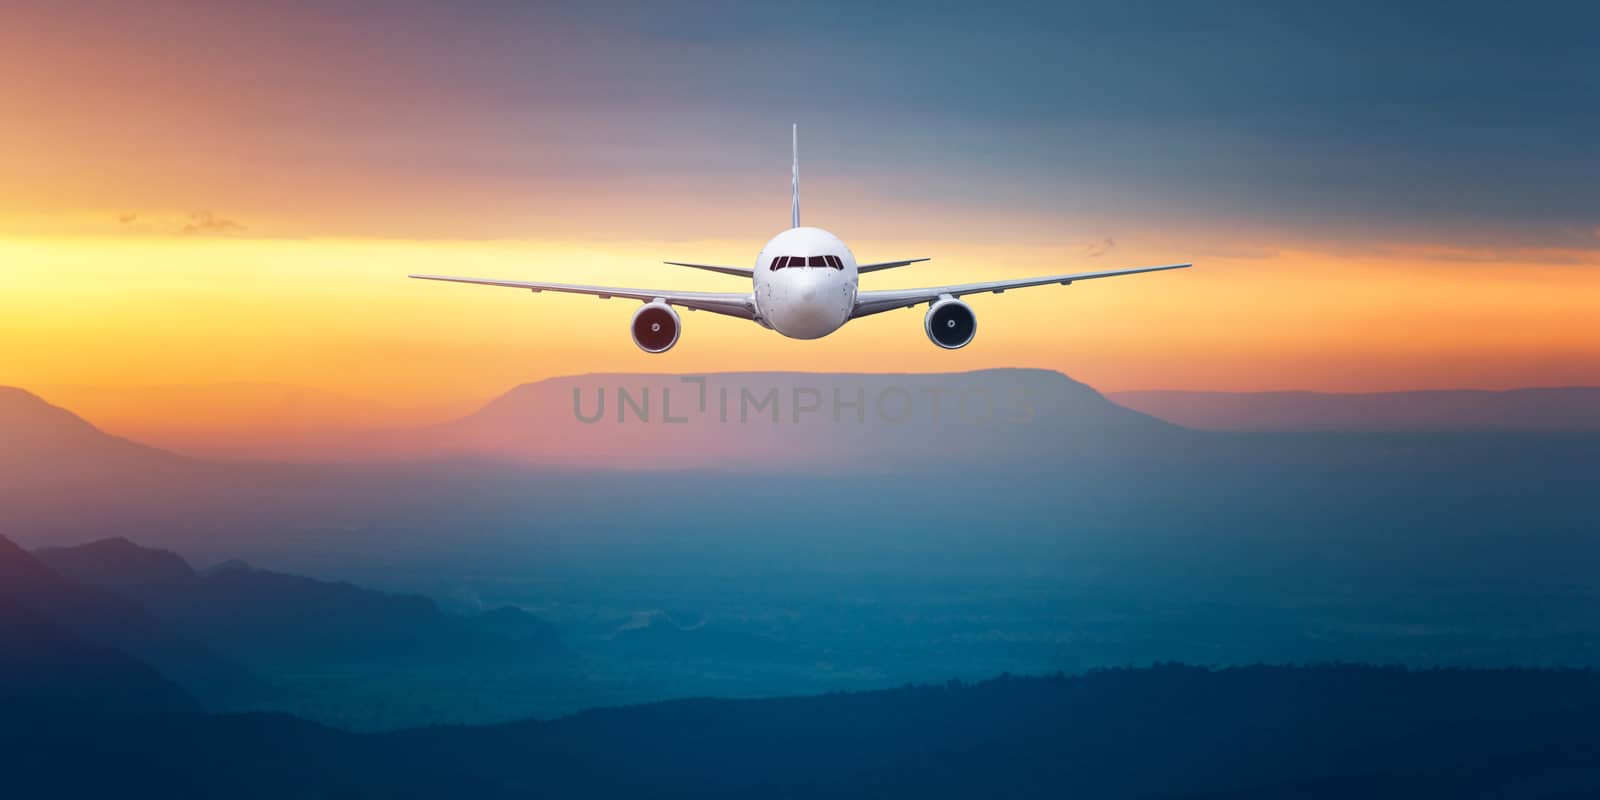 Front of real plane aircraft, isolated on sunset view background